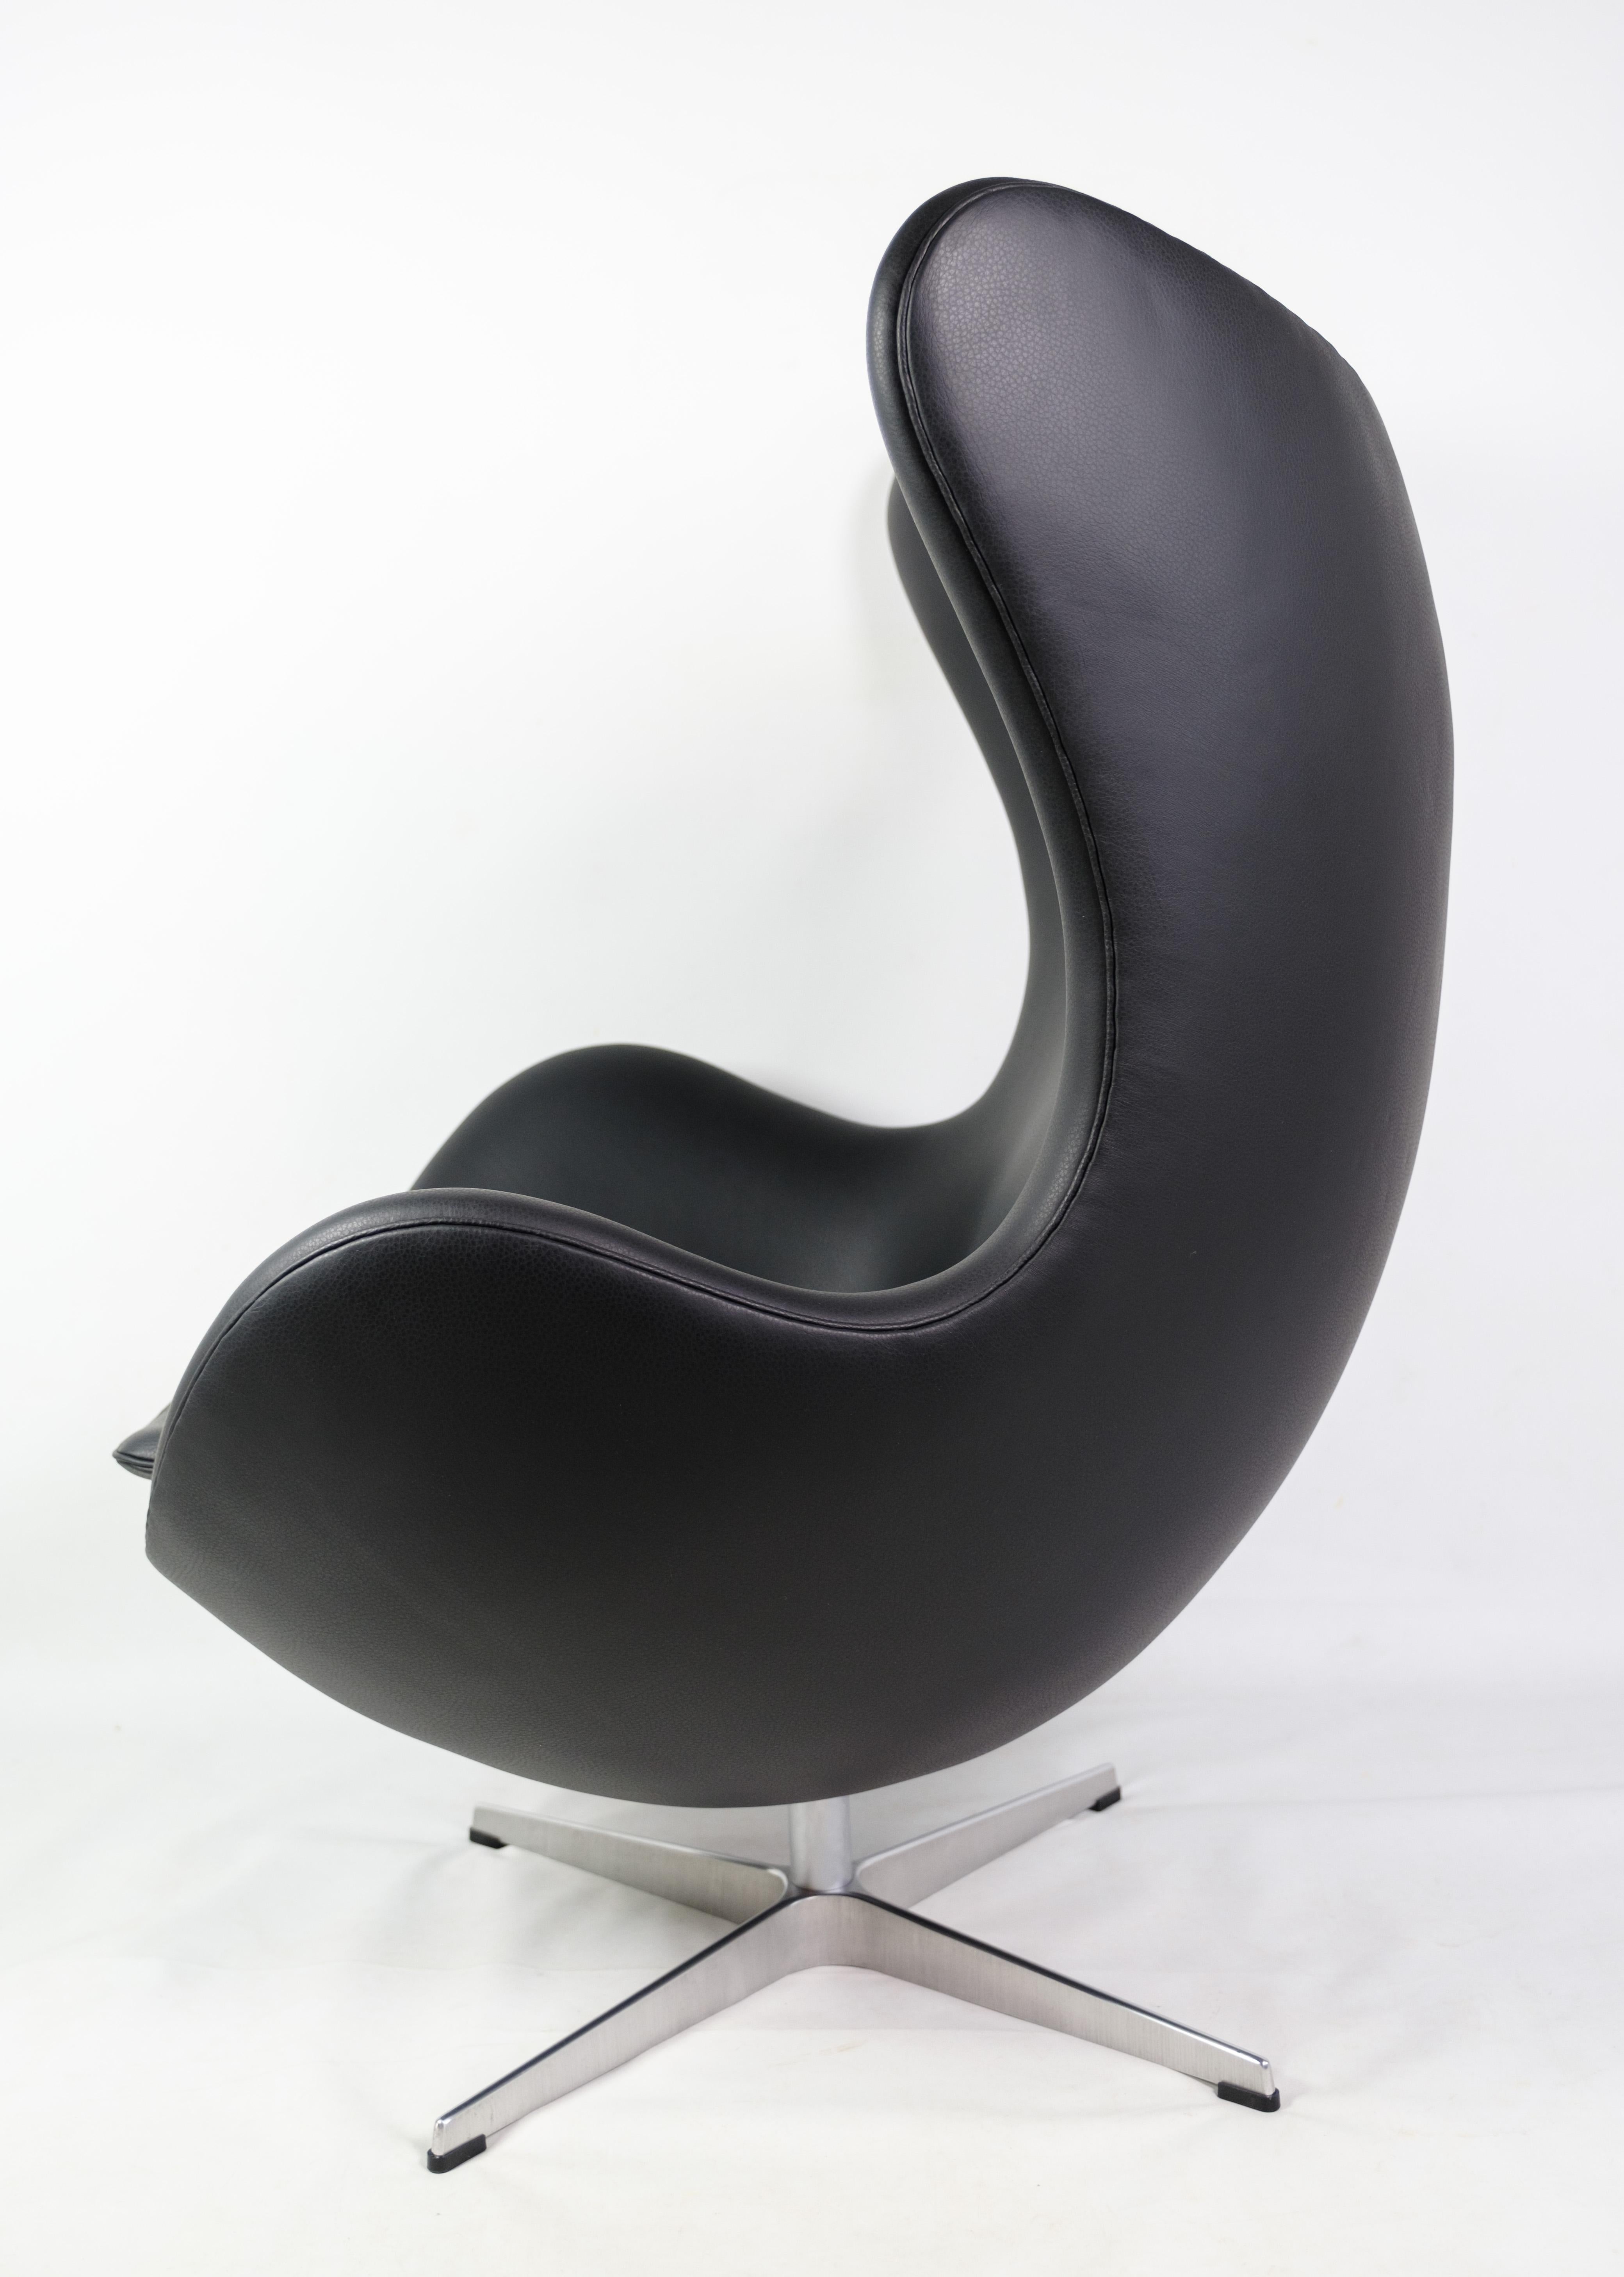 The Egg, model 3316, is a renowned chair designed by Arne Jacobsen in 1958 and manufactured by Fritz Hansen. This iconic piece is celebrated for its sculptural form and exceptional comfort. Designed originally for the lobby and reception areas of